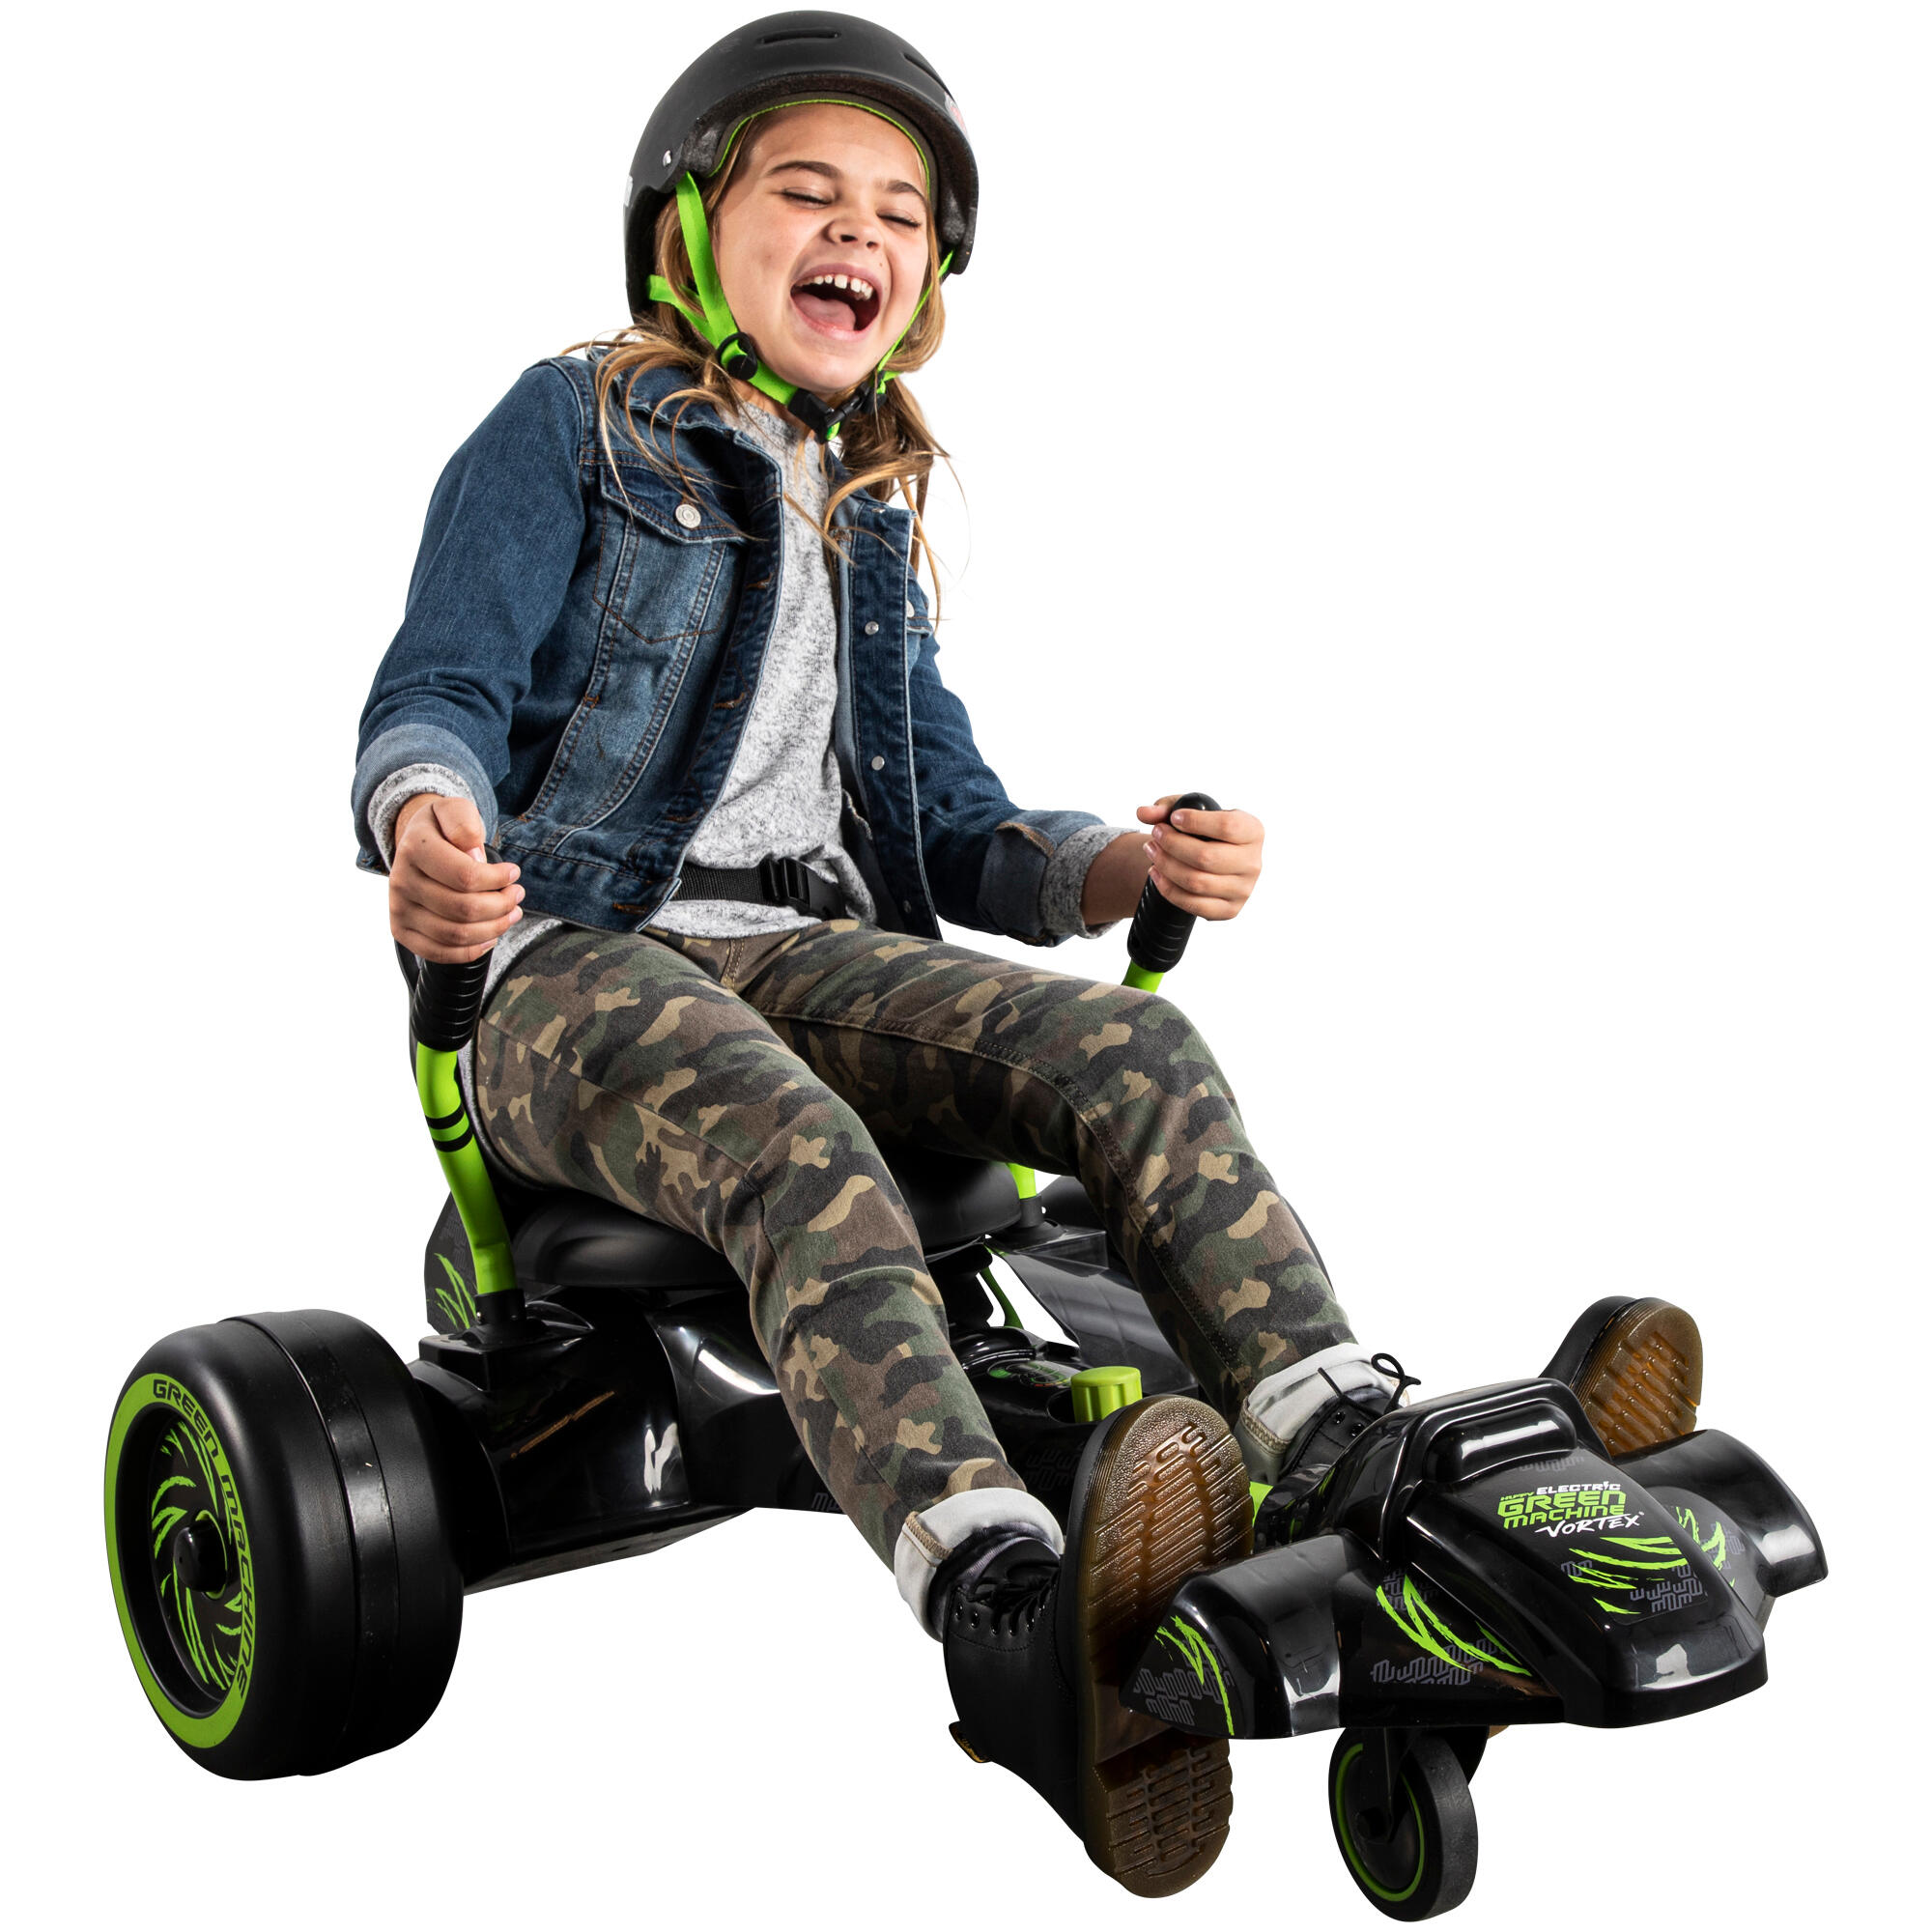 Huffy Green Machine Vortex - 12v Electric Ride On 360 Spin Action 1/5